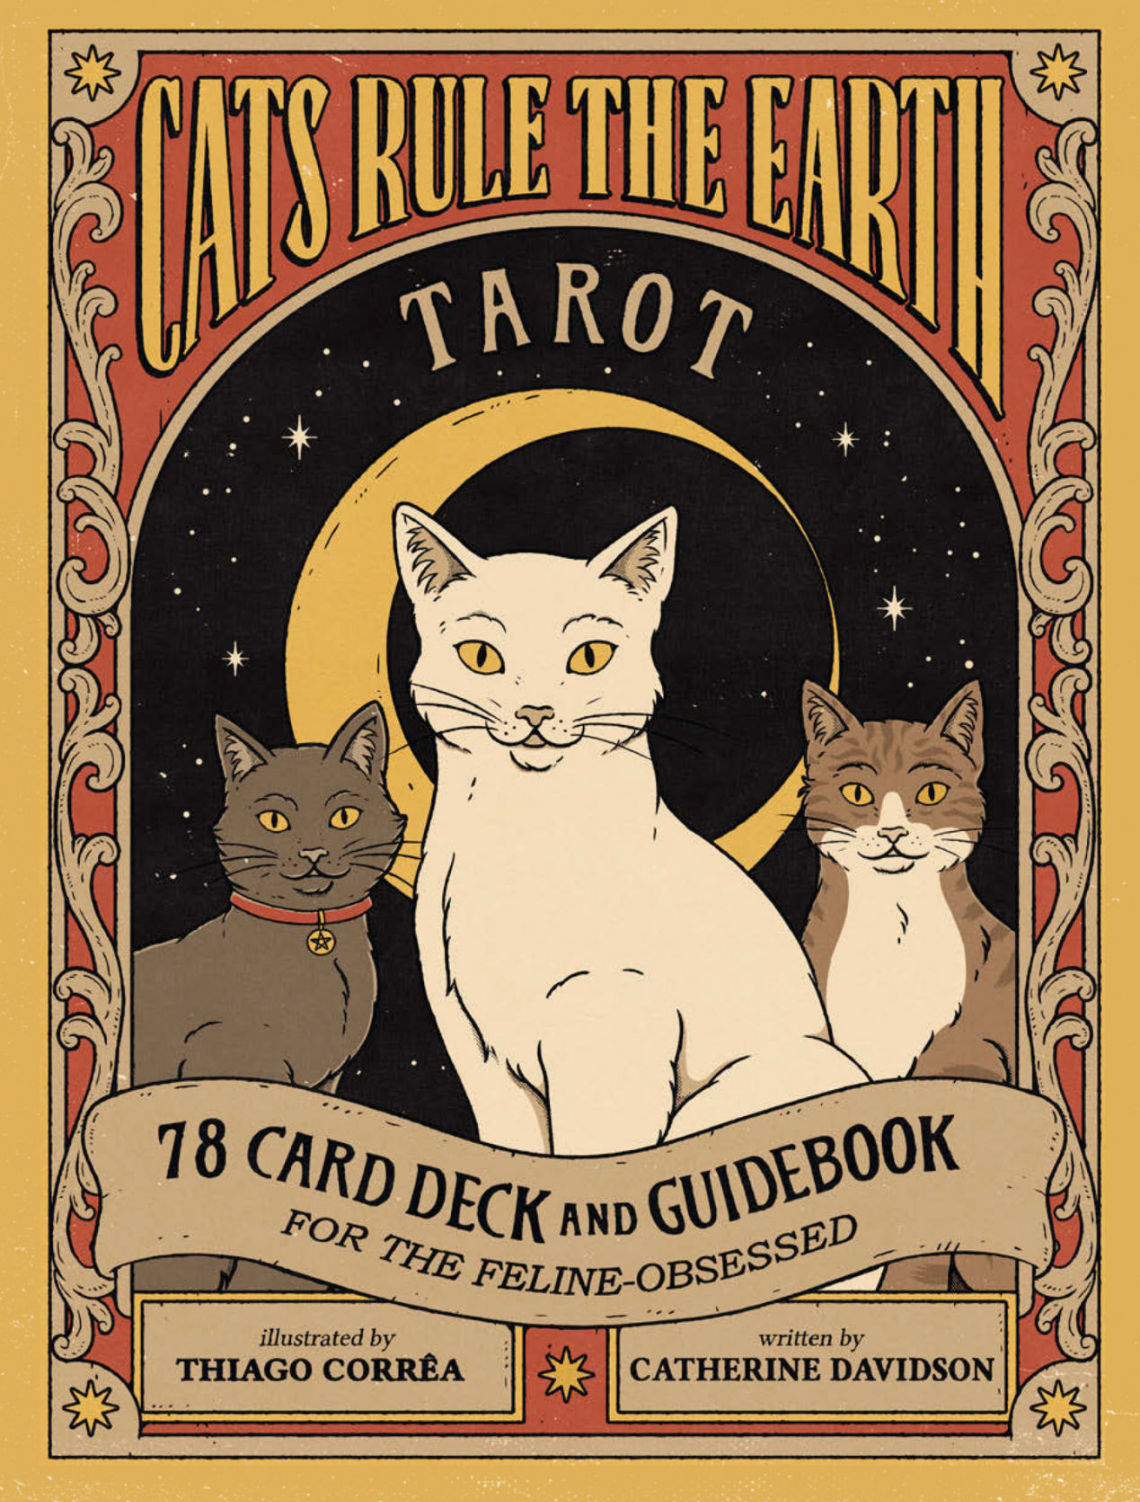 Cats Rule The Earth Tarot by Catherine Davidson